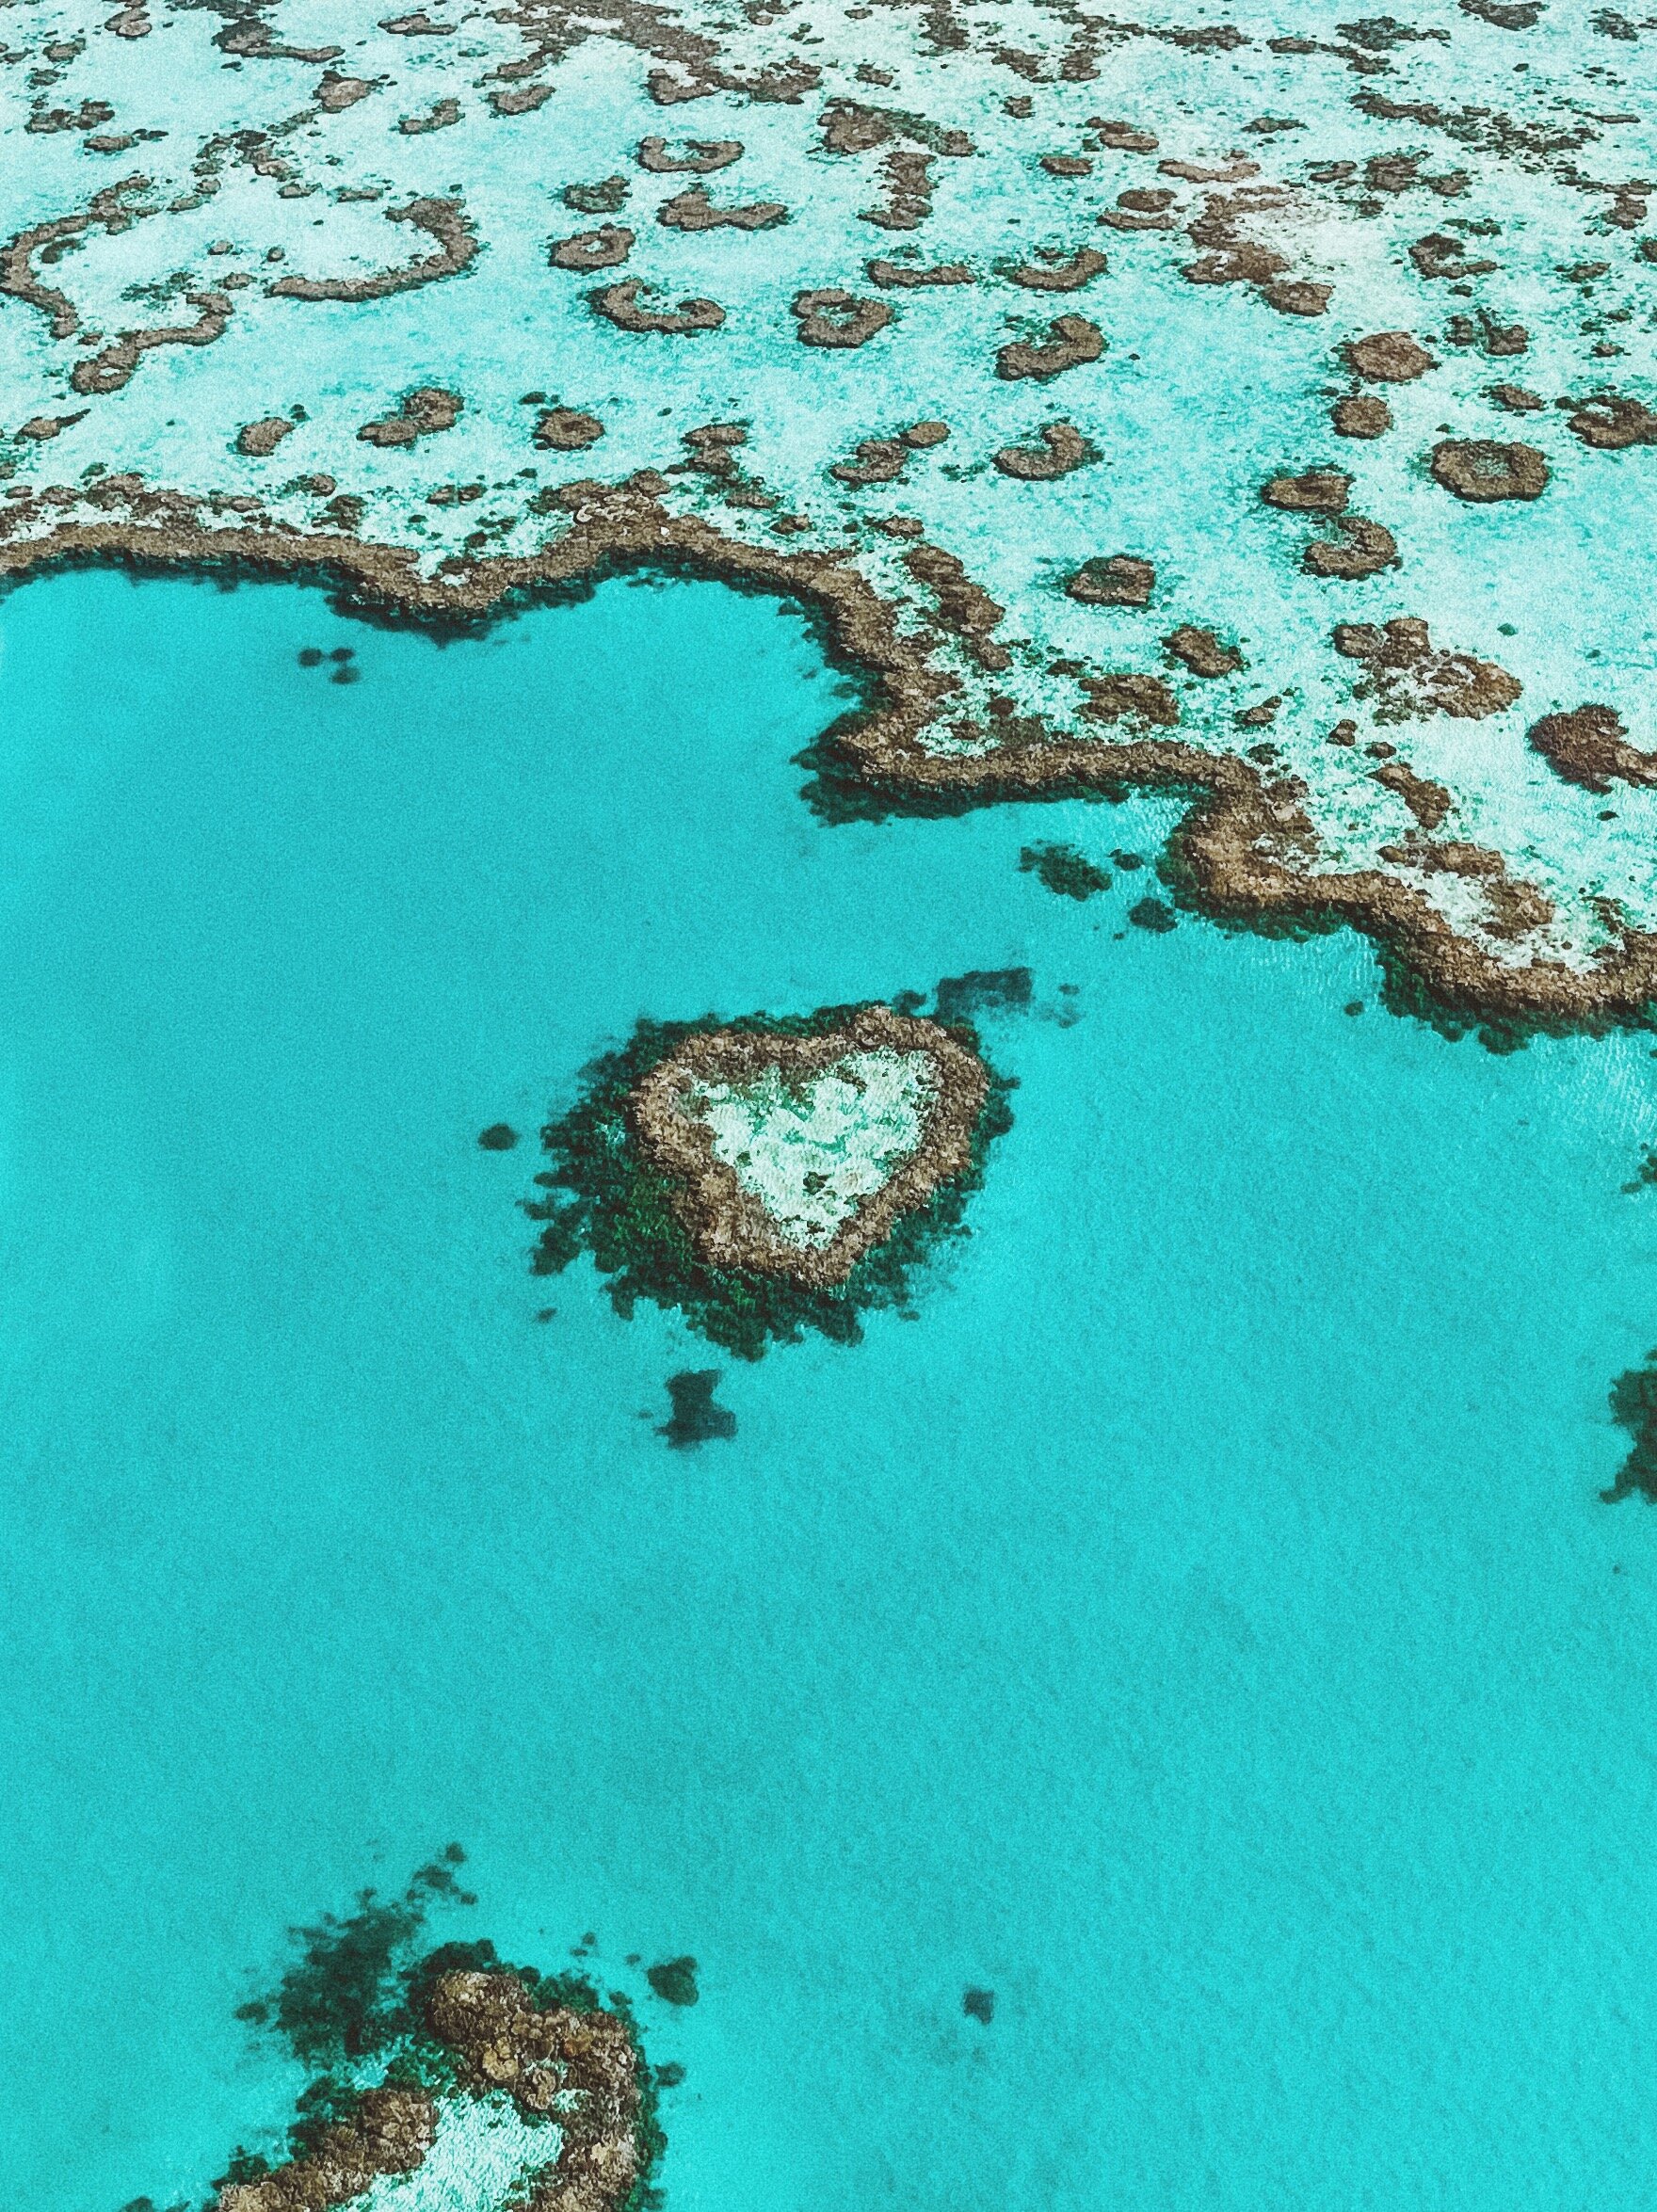 Heart Shaped Reef - Great Barrier Reef - Whitsundays - Helicopter Tour - Tropical North Queensland (QLD) - Australia